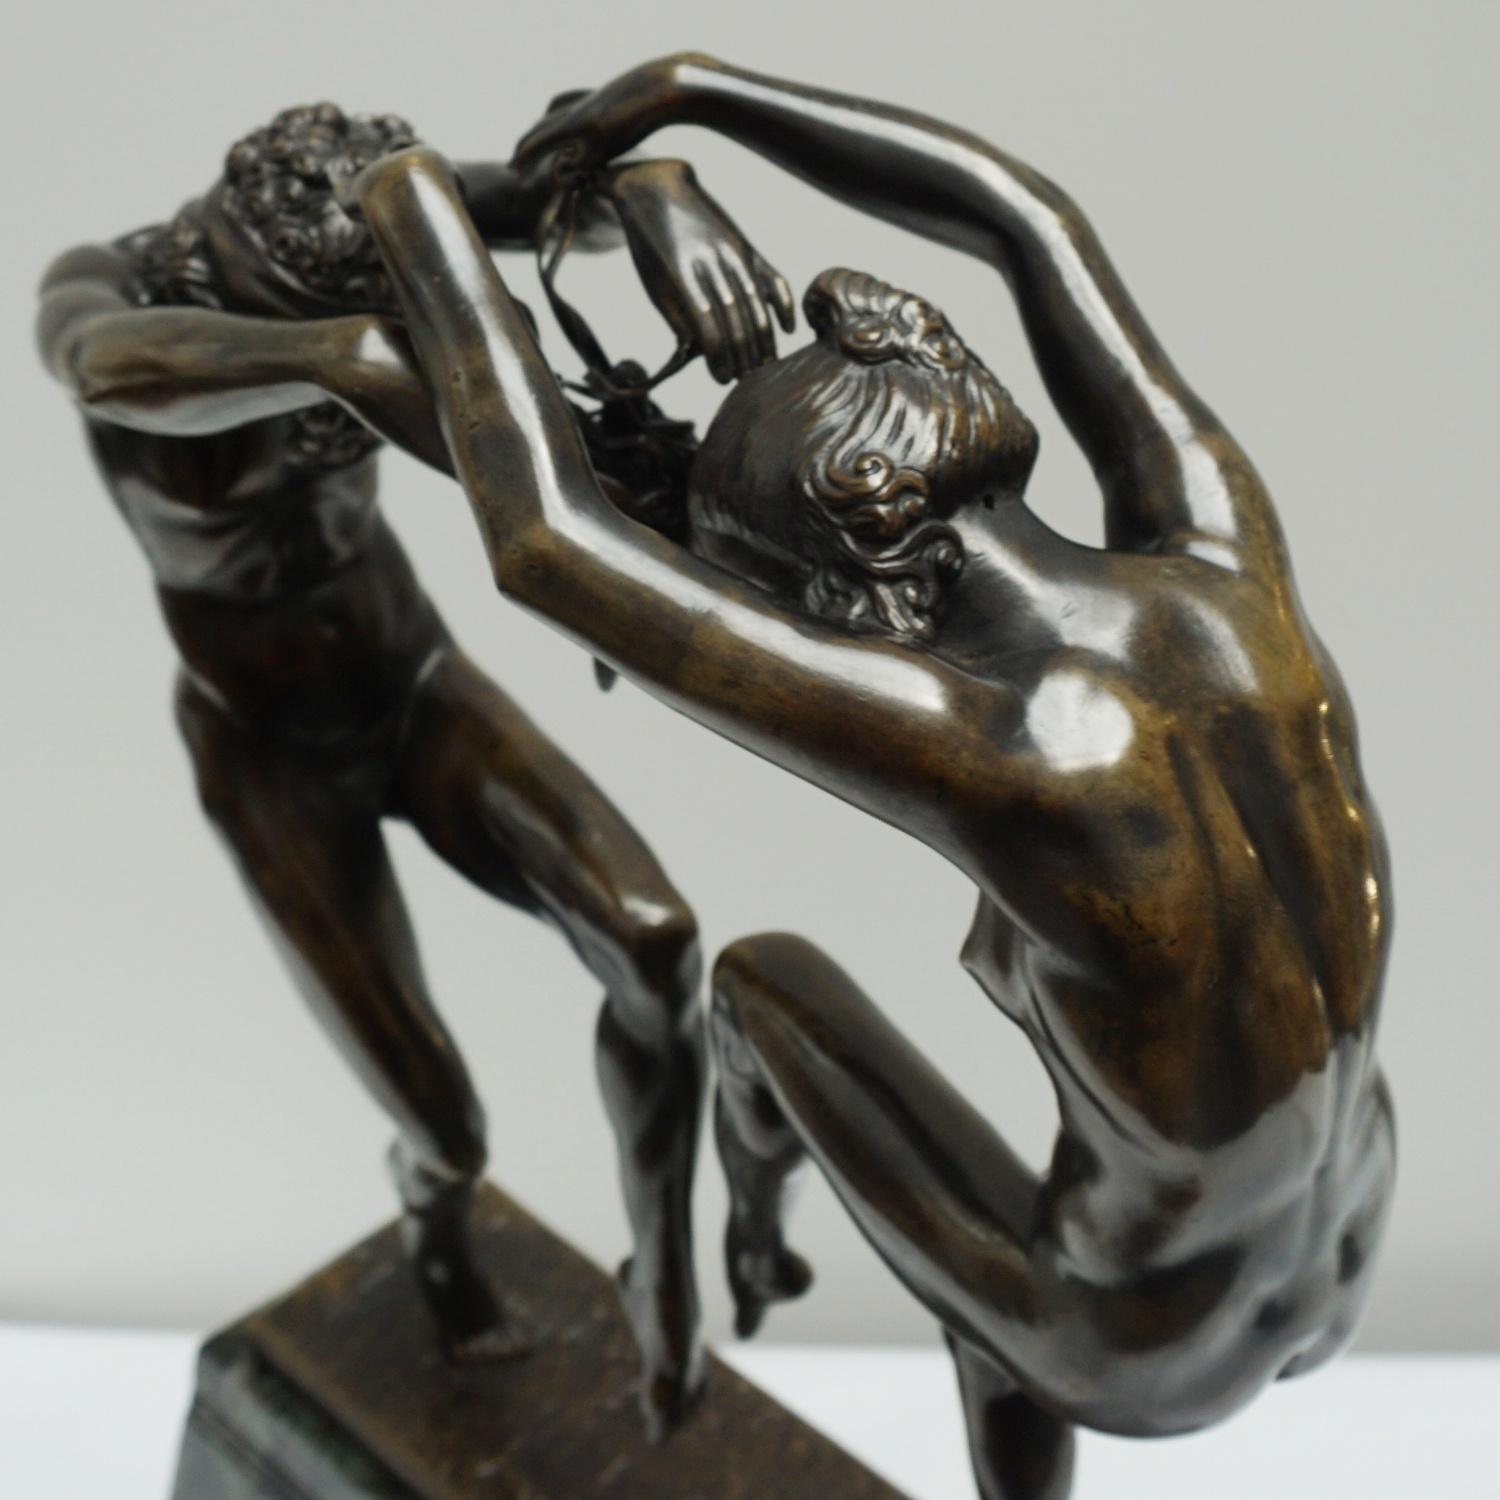 Original Art Deco Bronze and Marble Sculpture, French, C1920 For Sale 7